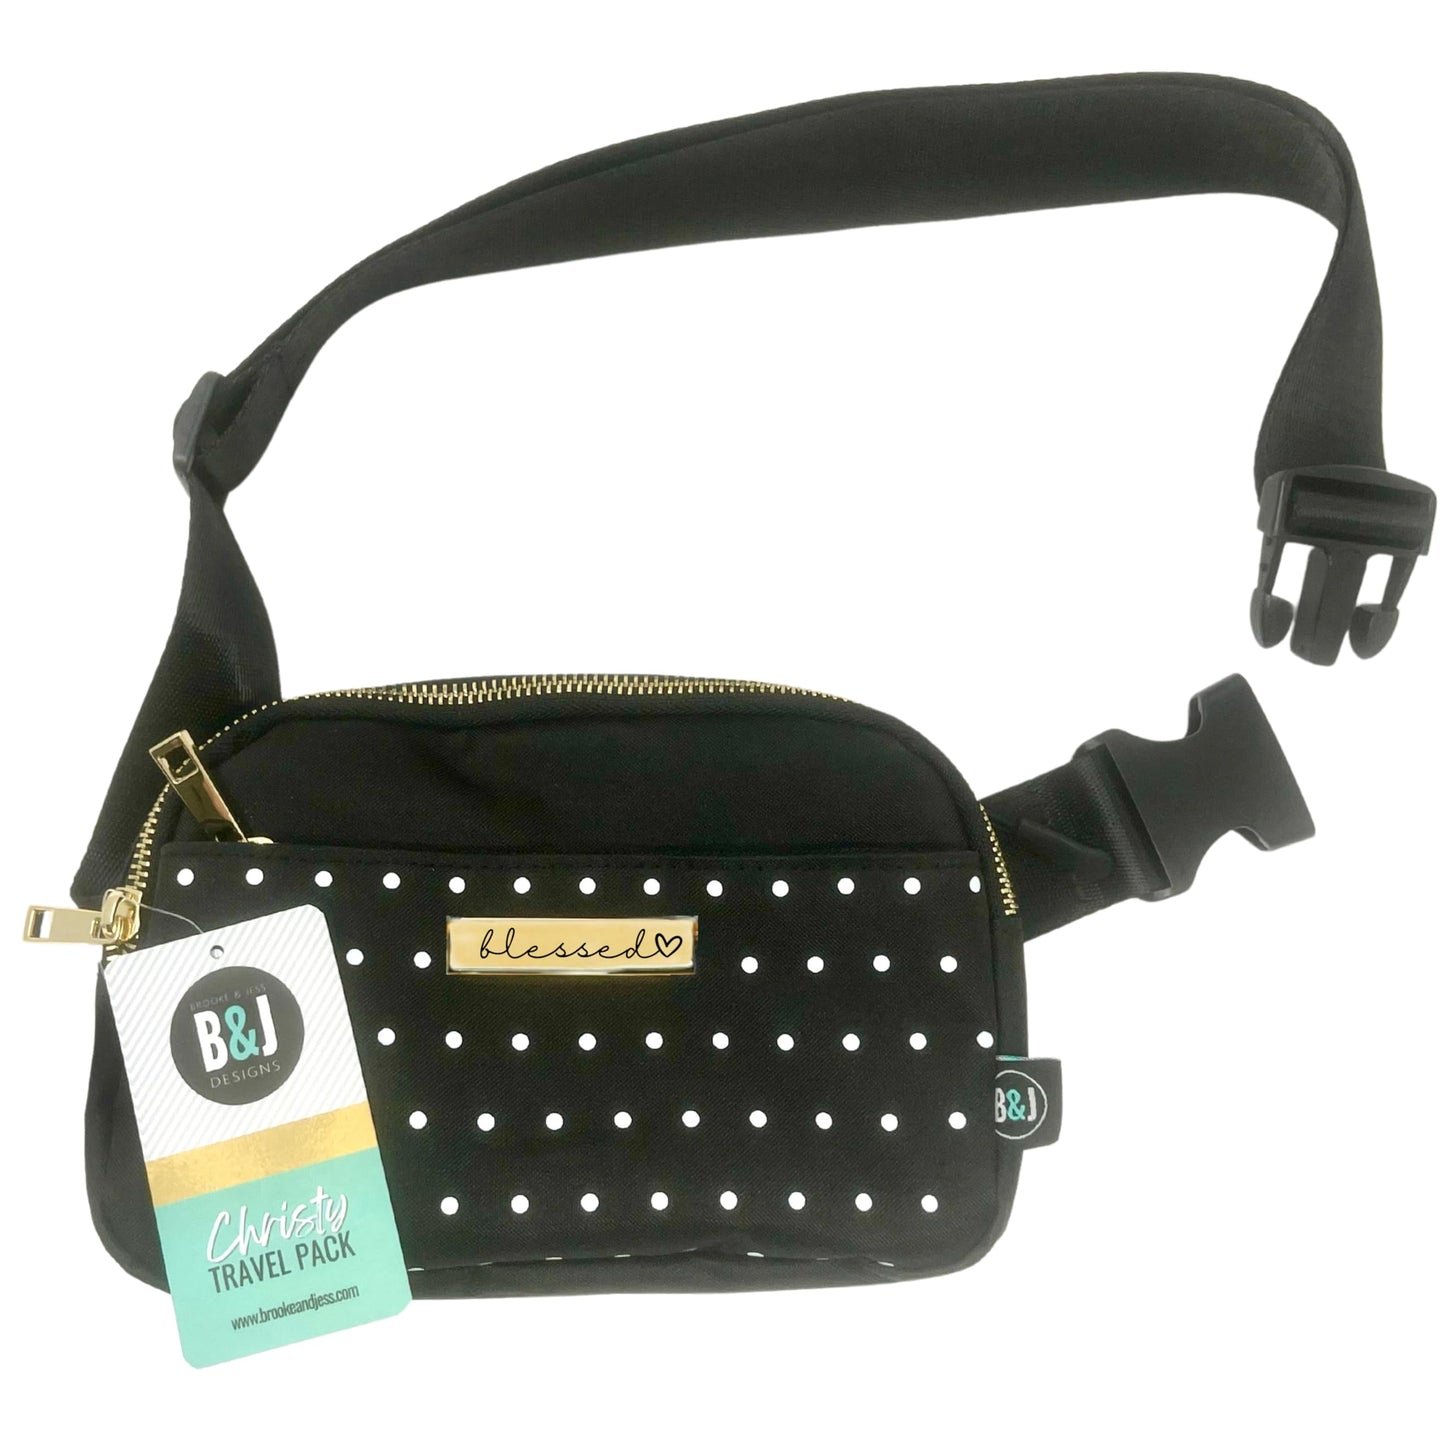 Christy Travel Fanny Pack (Blessed)